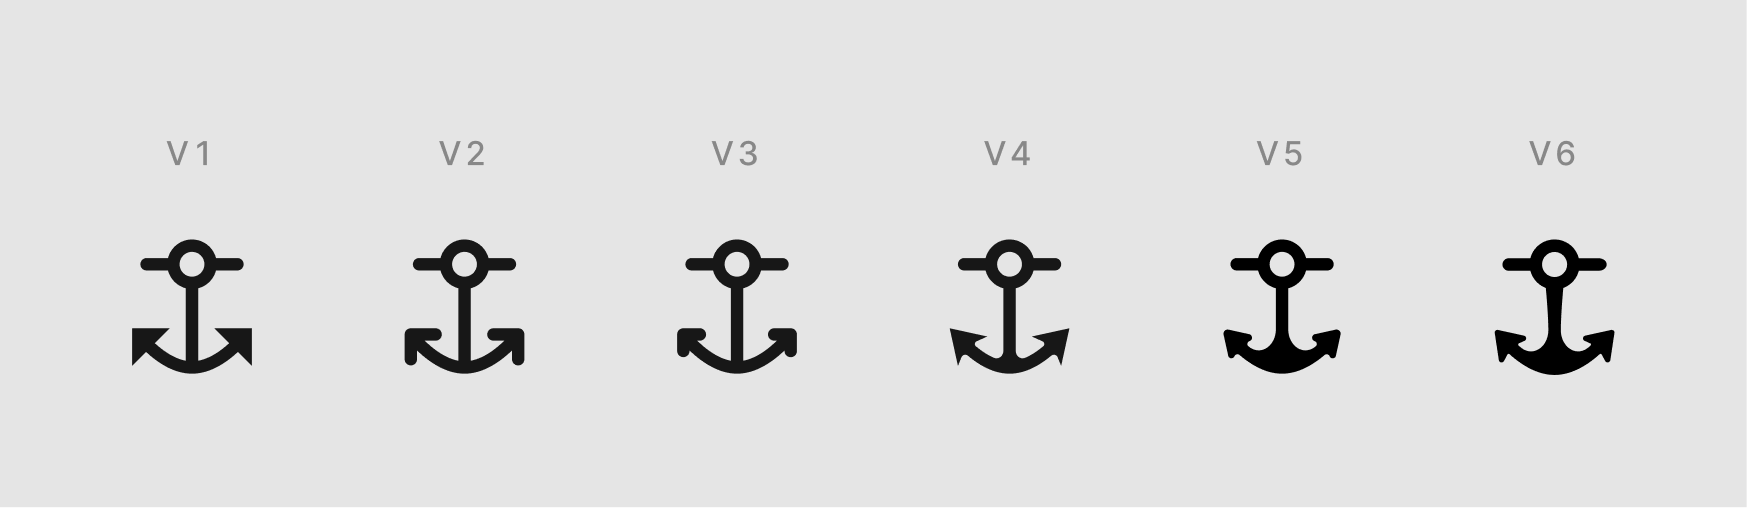 A number of iterations on the Shiplog anchor icon.